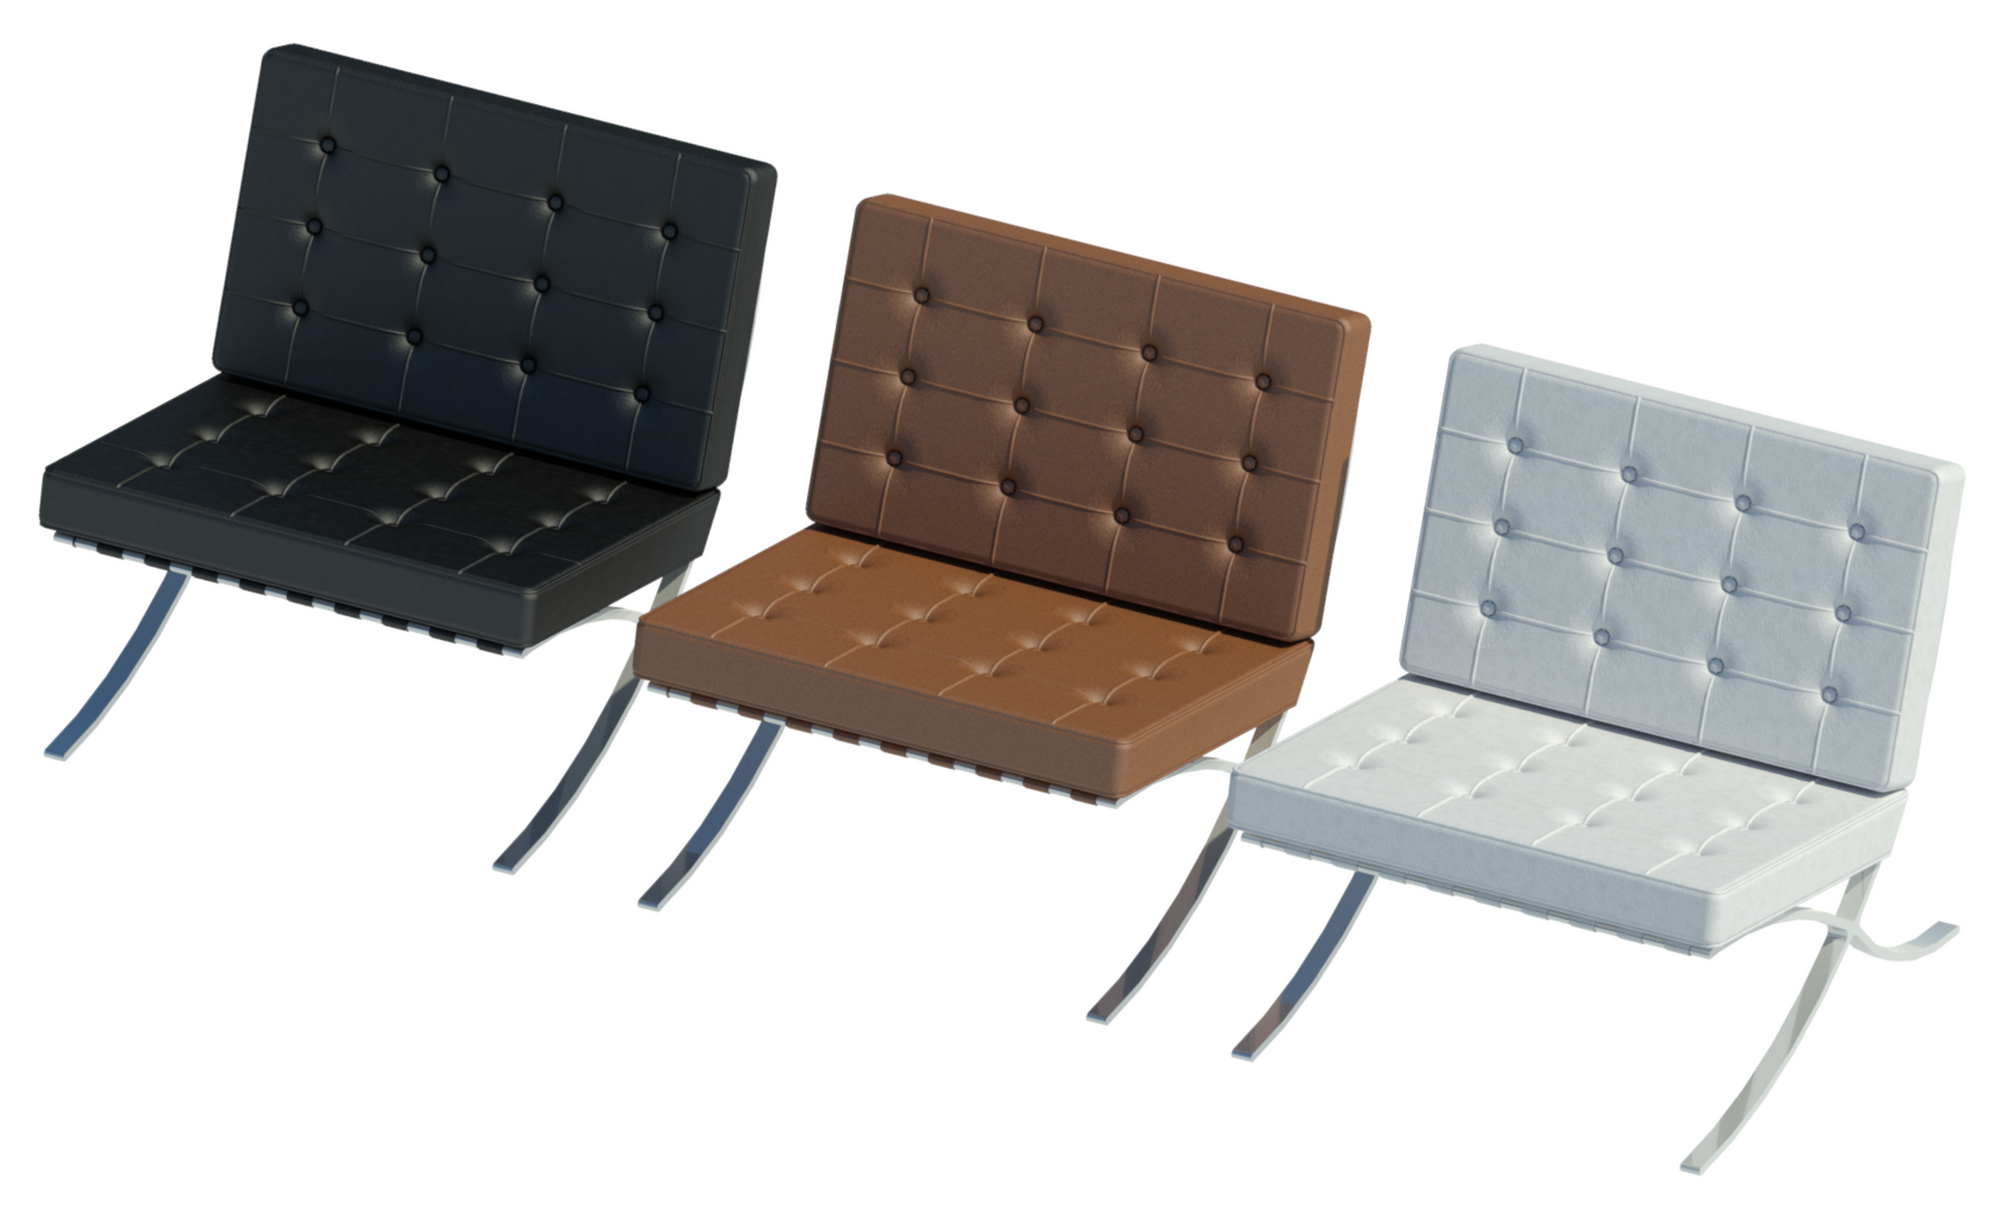 Barcelona chair model with three types for white, brown and black leather upholstery.